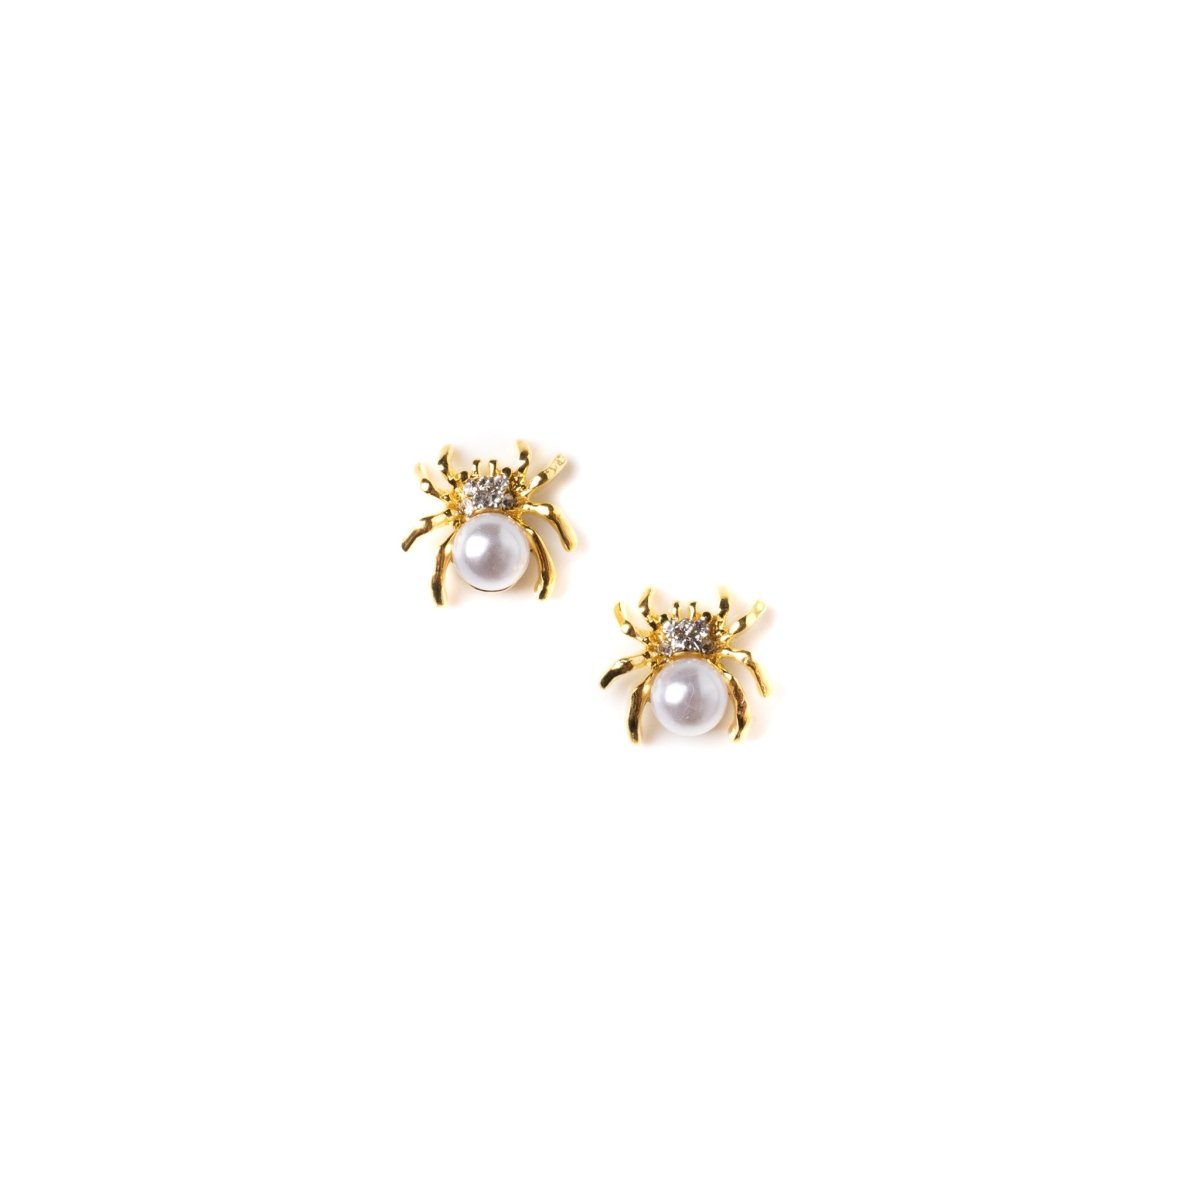 Gold W/ White Pearl Spider Charm - Hey Beautiful Nail Supplies